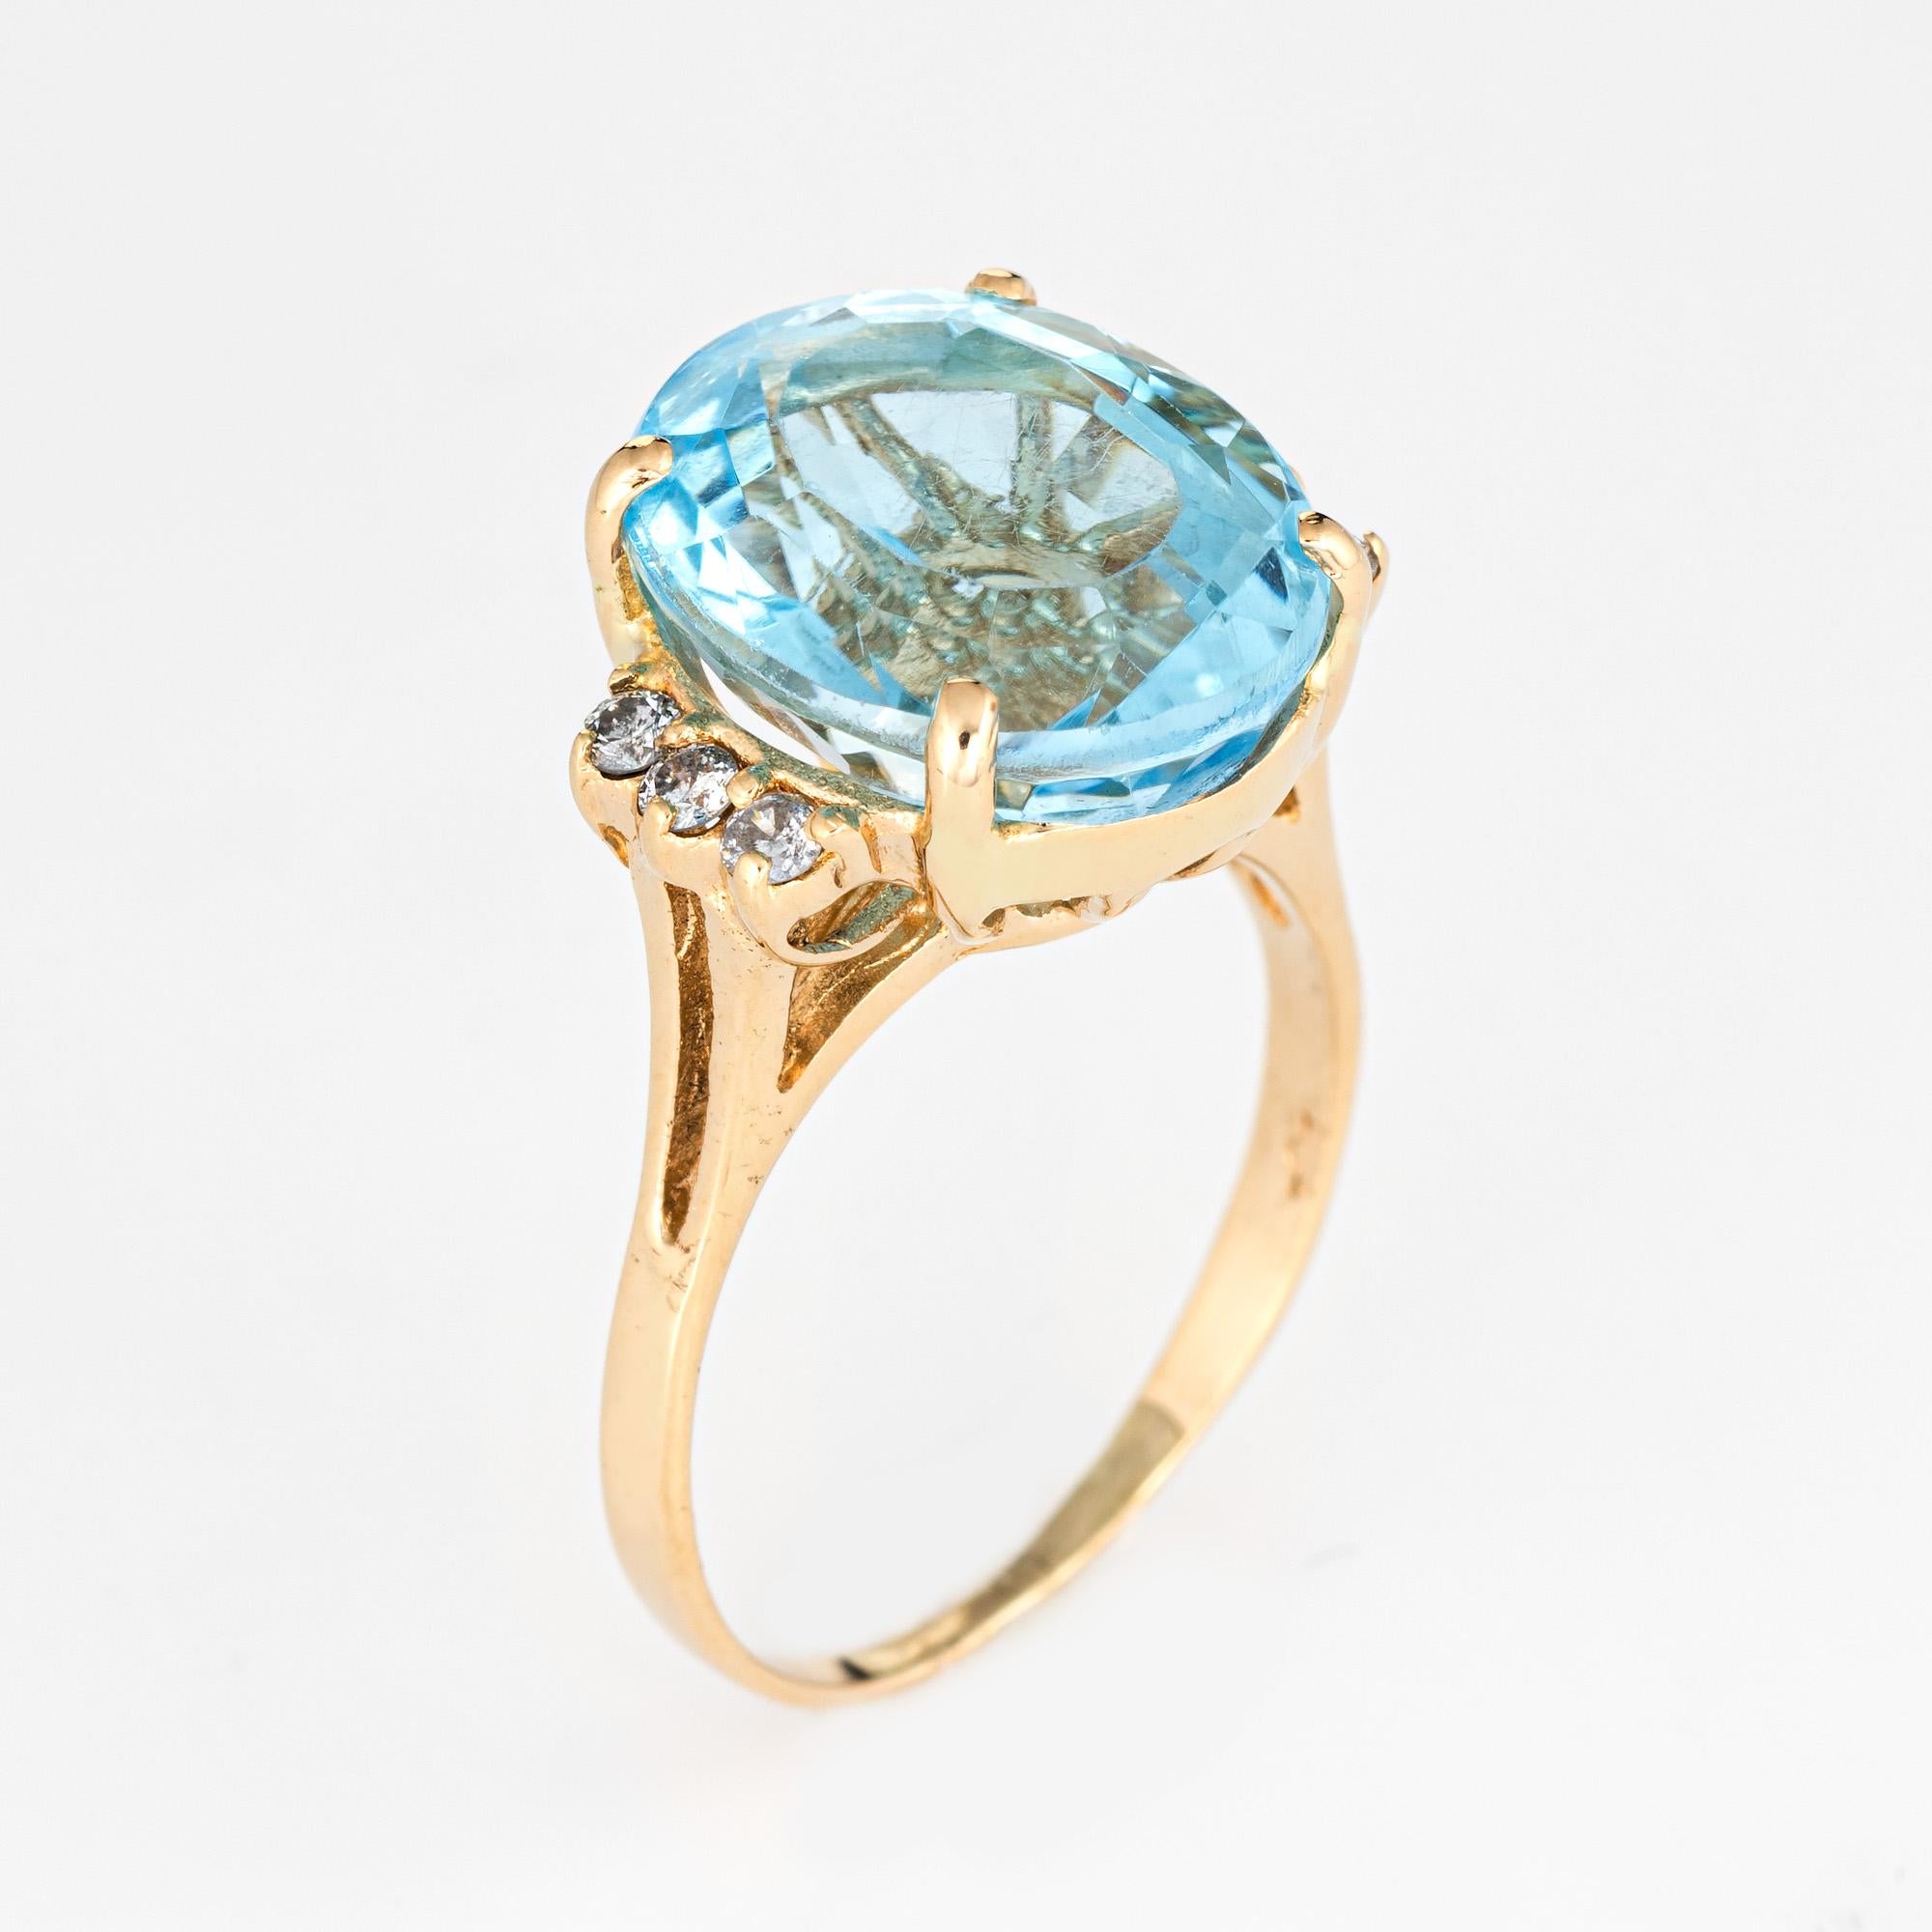 Stylish vintage blue topaz & diamond cocktail ring (circa 1980s to 1990s) crafted in 14 karat yellow gold. 

Oval faceted blue topaz measures 14mm x 12mm (estimated at 12 carats), accented with an estimated 0.12 carats of diamonds (estimated at H-I